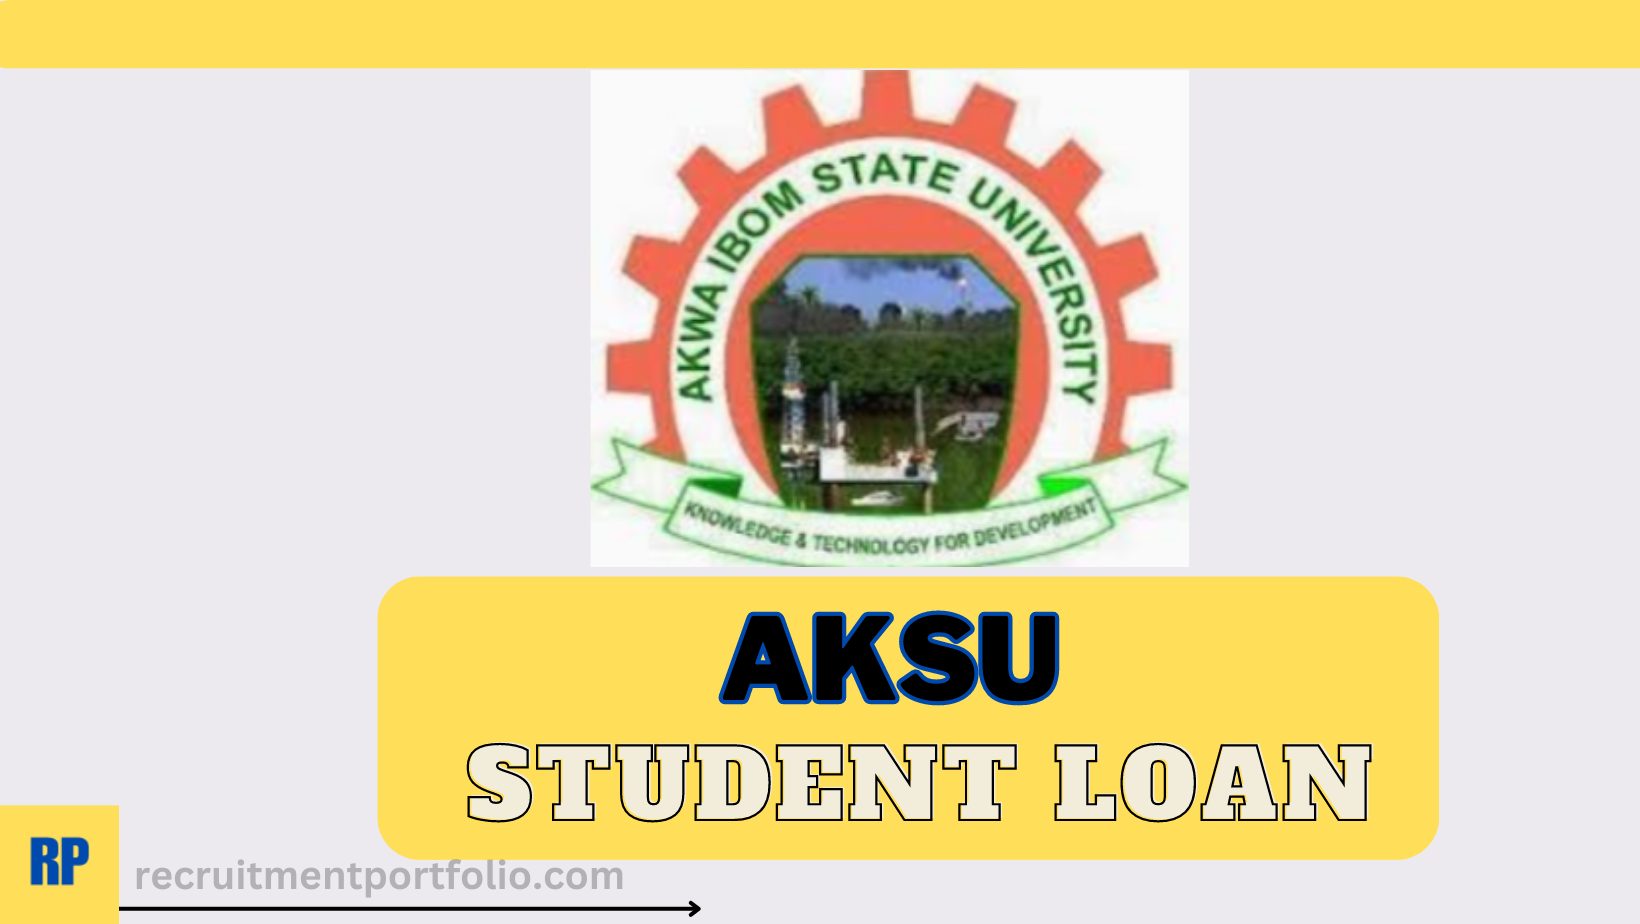 AKSU Student Loan | See Requirements and Application Form